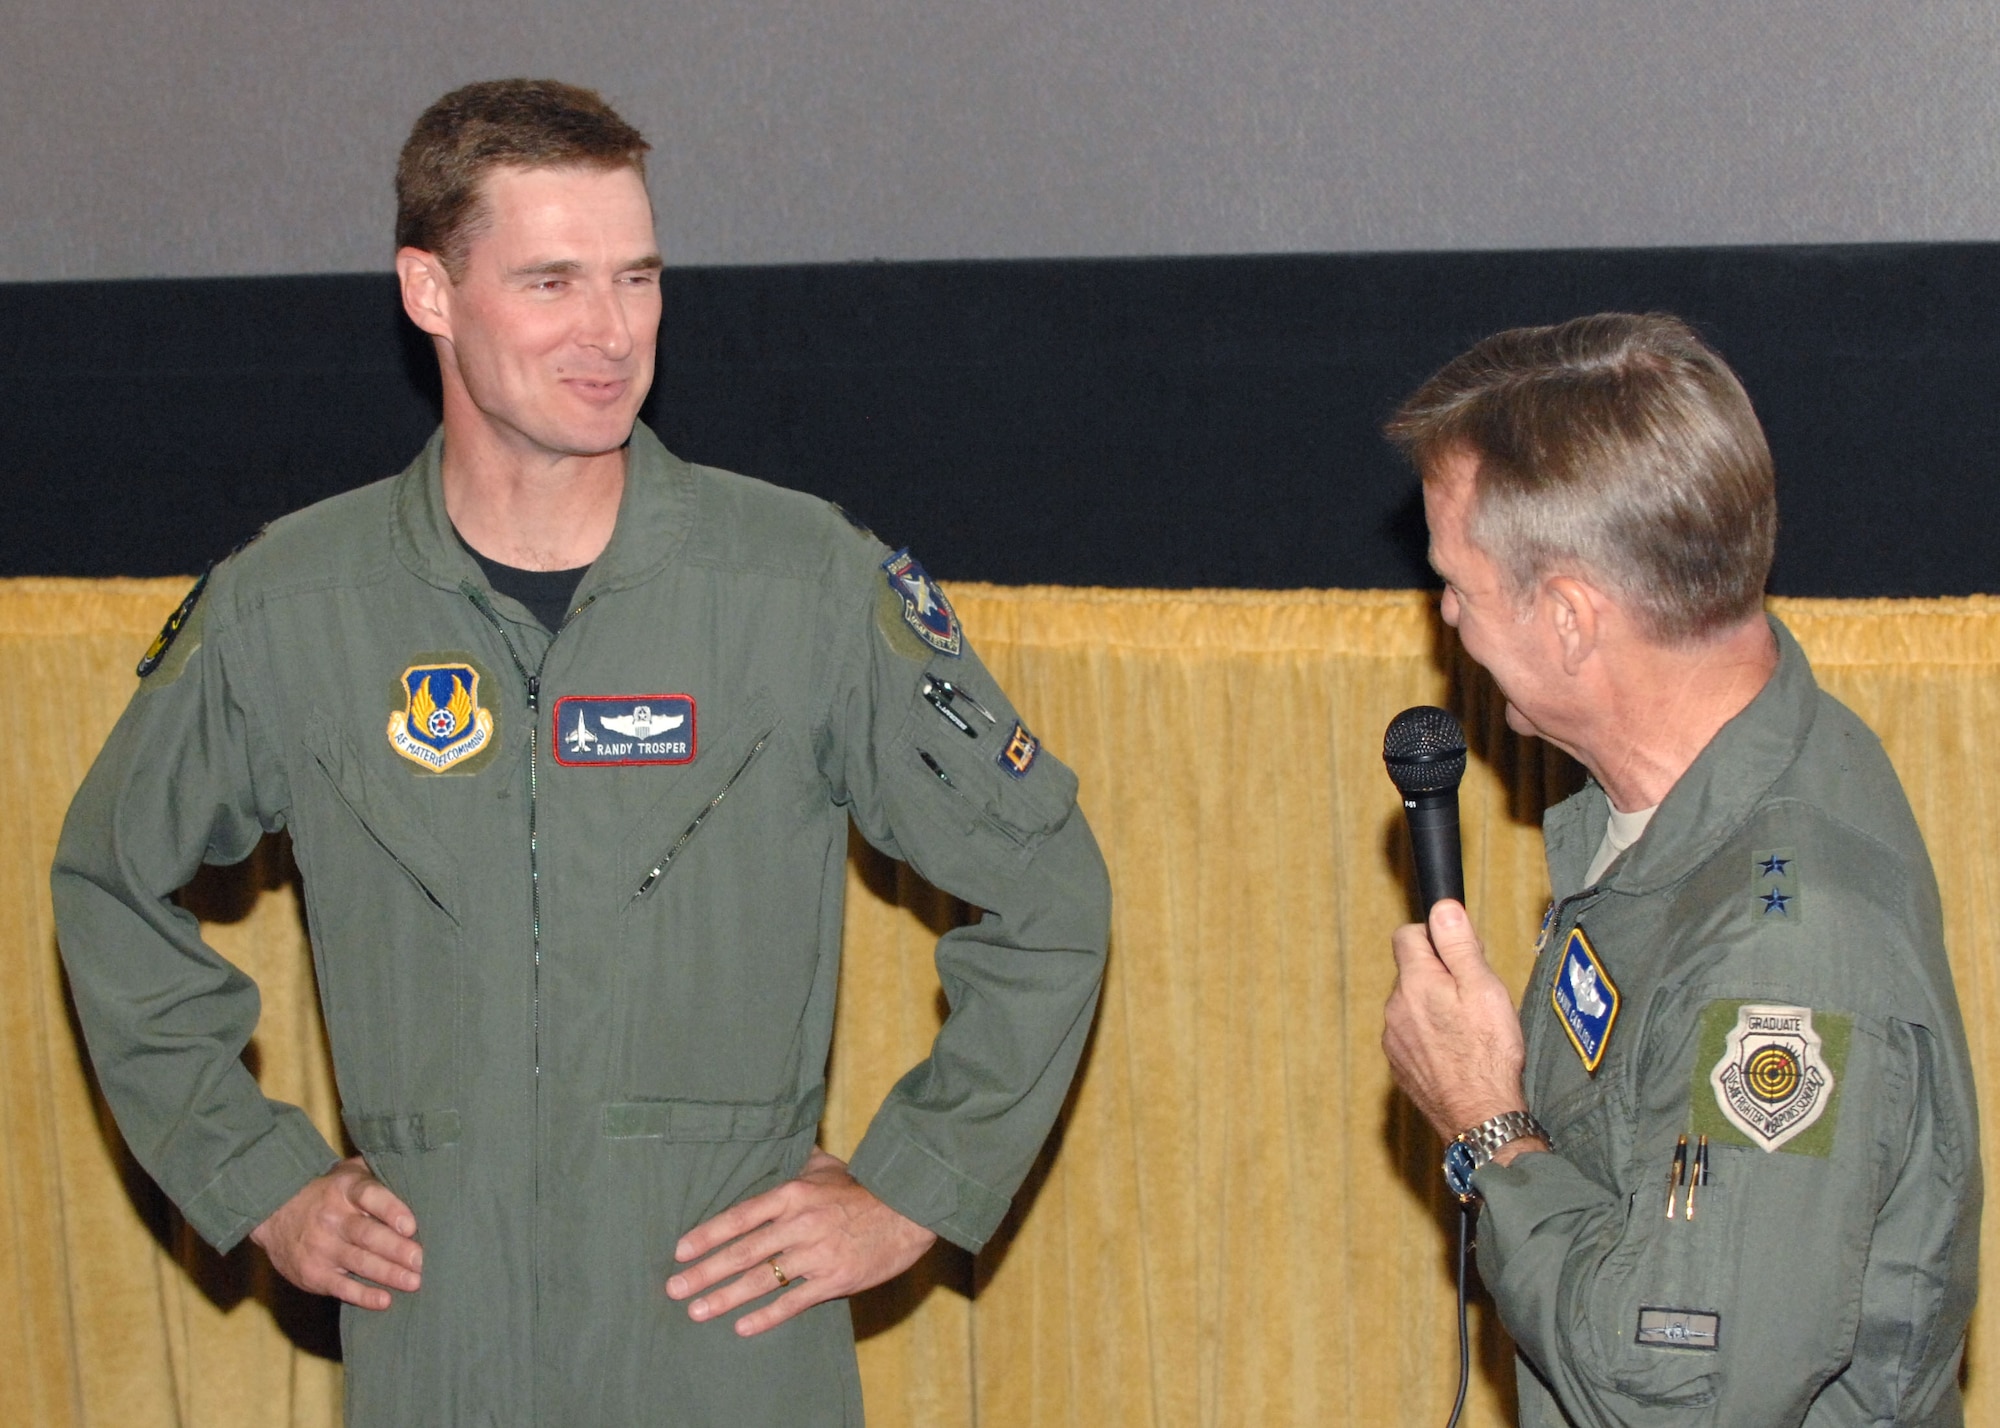 U.S. Air Force Maj. Gen. Hawk Carlisle and Maj. Rob Jackson, special guest fighter pilots, answer questions from the audience about daily life in the Air Force before the Los Angeles Air Force Film Festival showing of “Fighter Pilot: Operation Red Flag,” at Canyon Country 10 Theater, Nov. 16, 2008. (U.S. Air Force photo by Senior Airman Ashley Moreno)